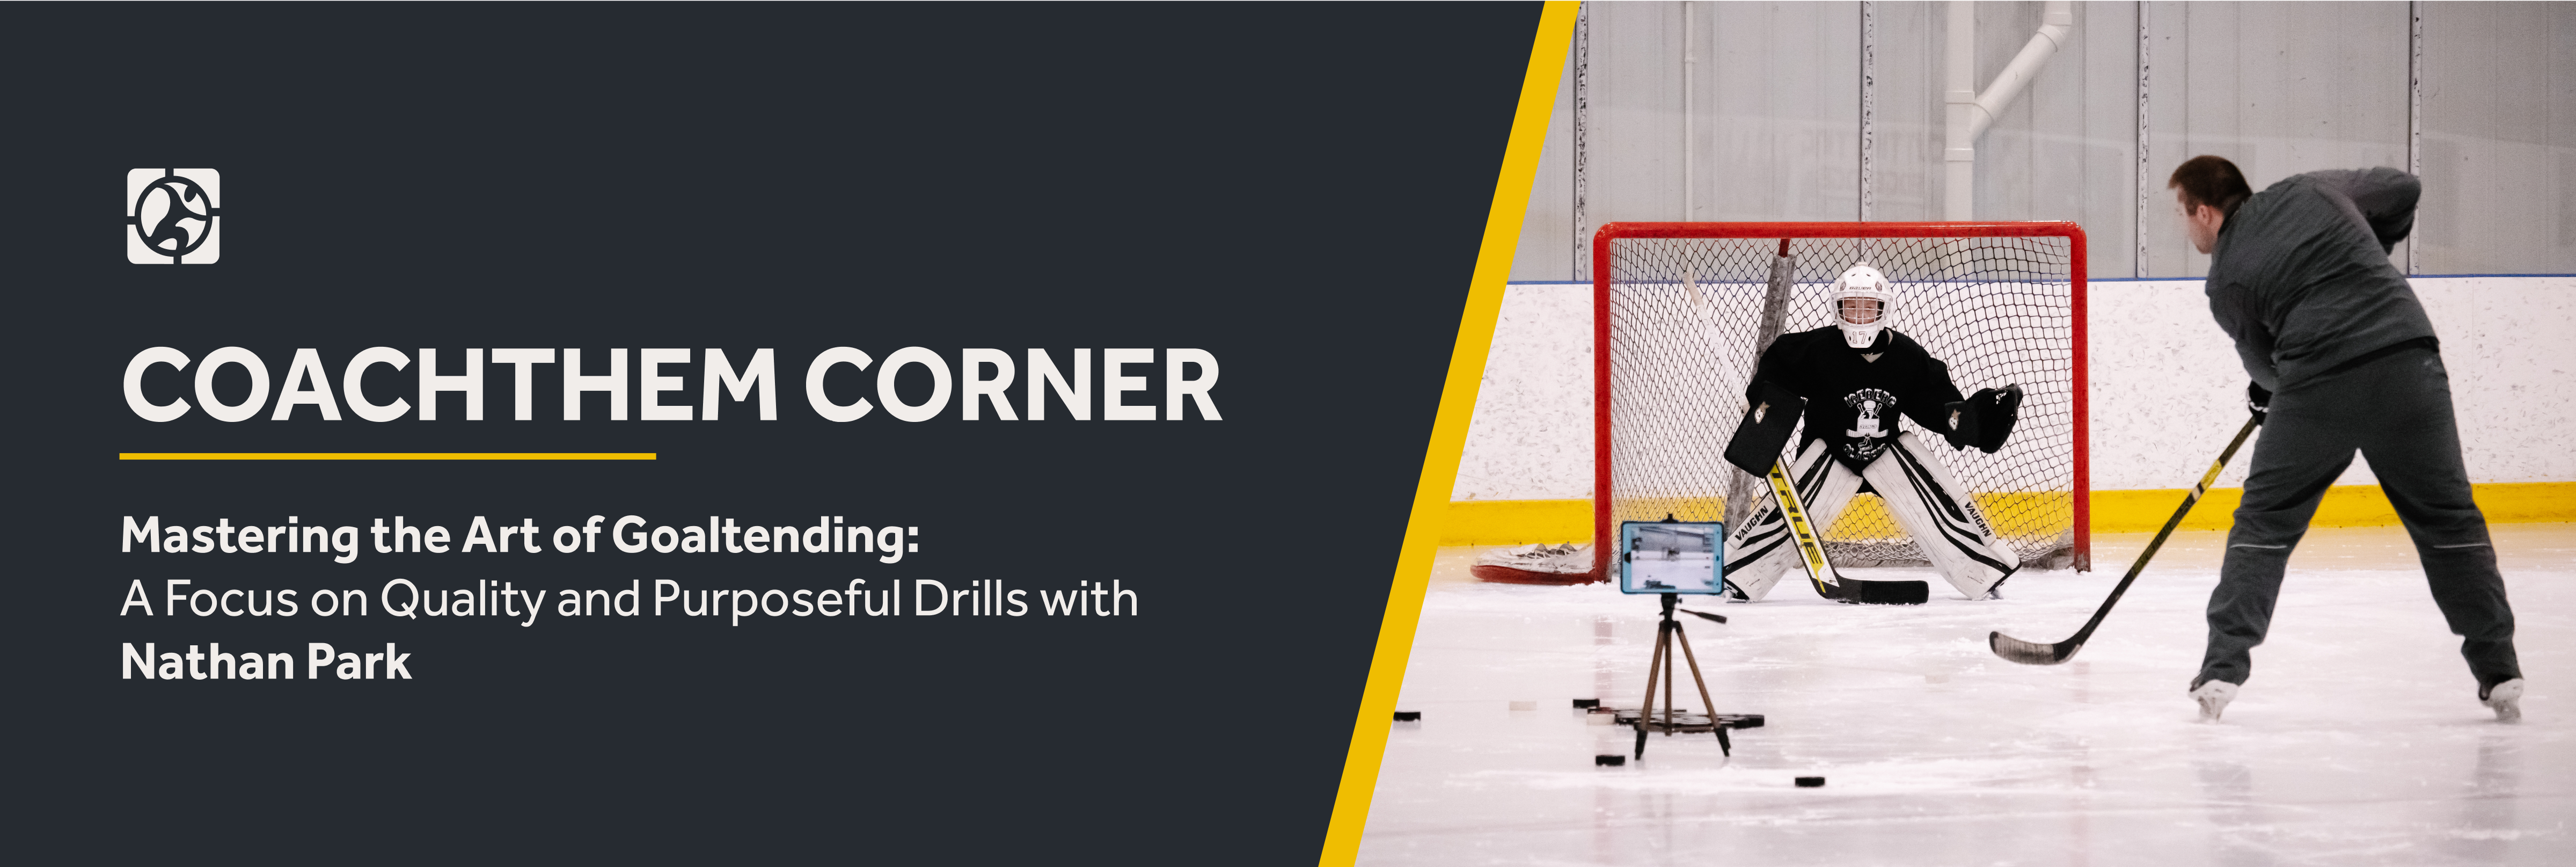 Mastering the Art of Goaltending: A Focus on Quality and Purposeful Drills with Nathan Park